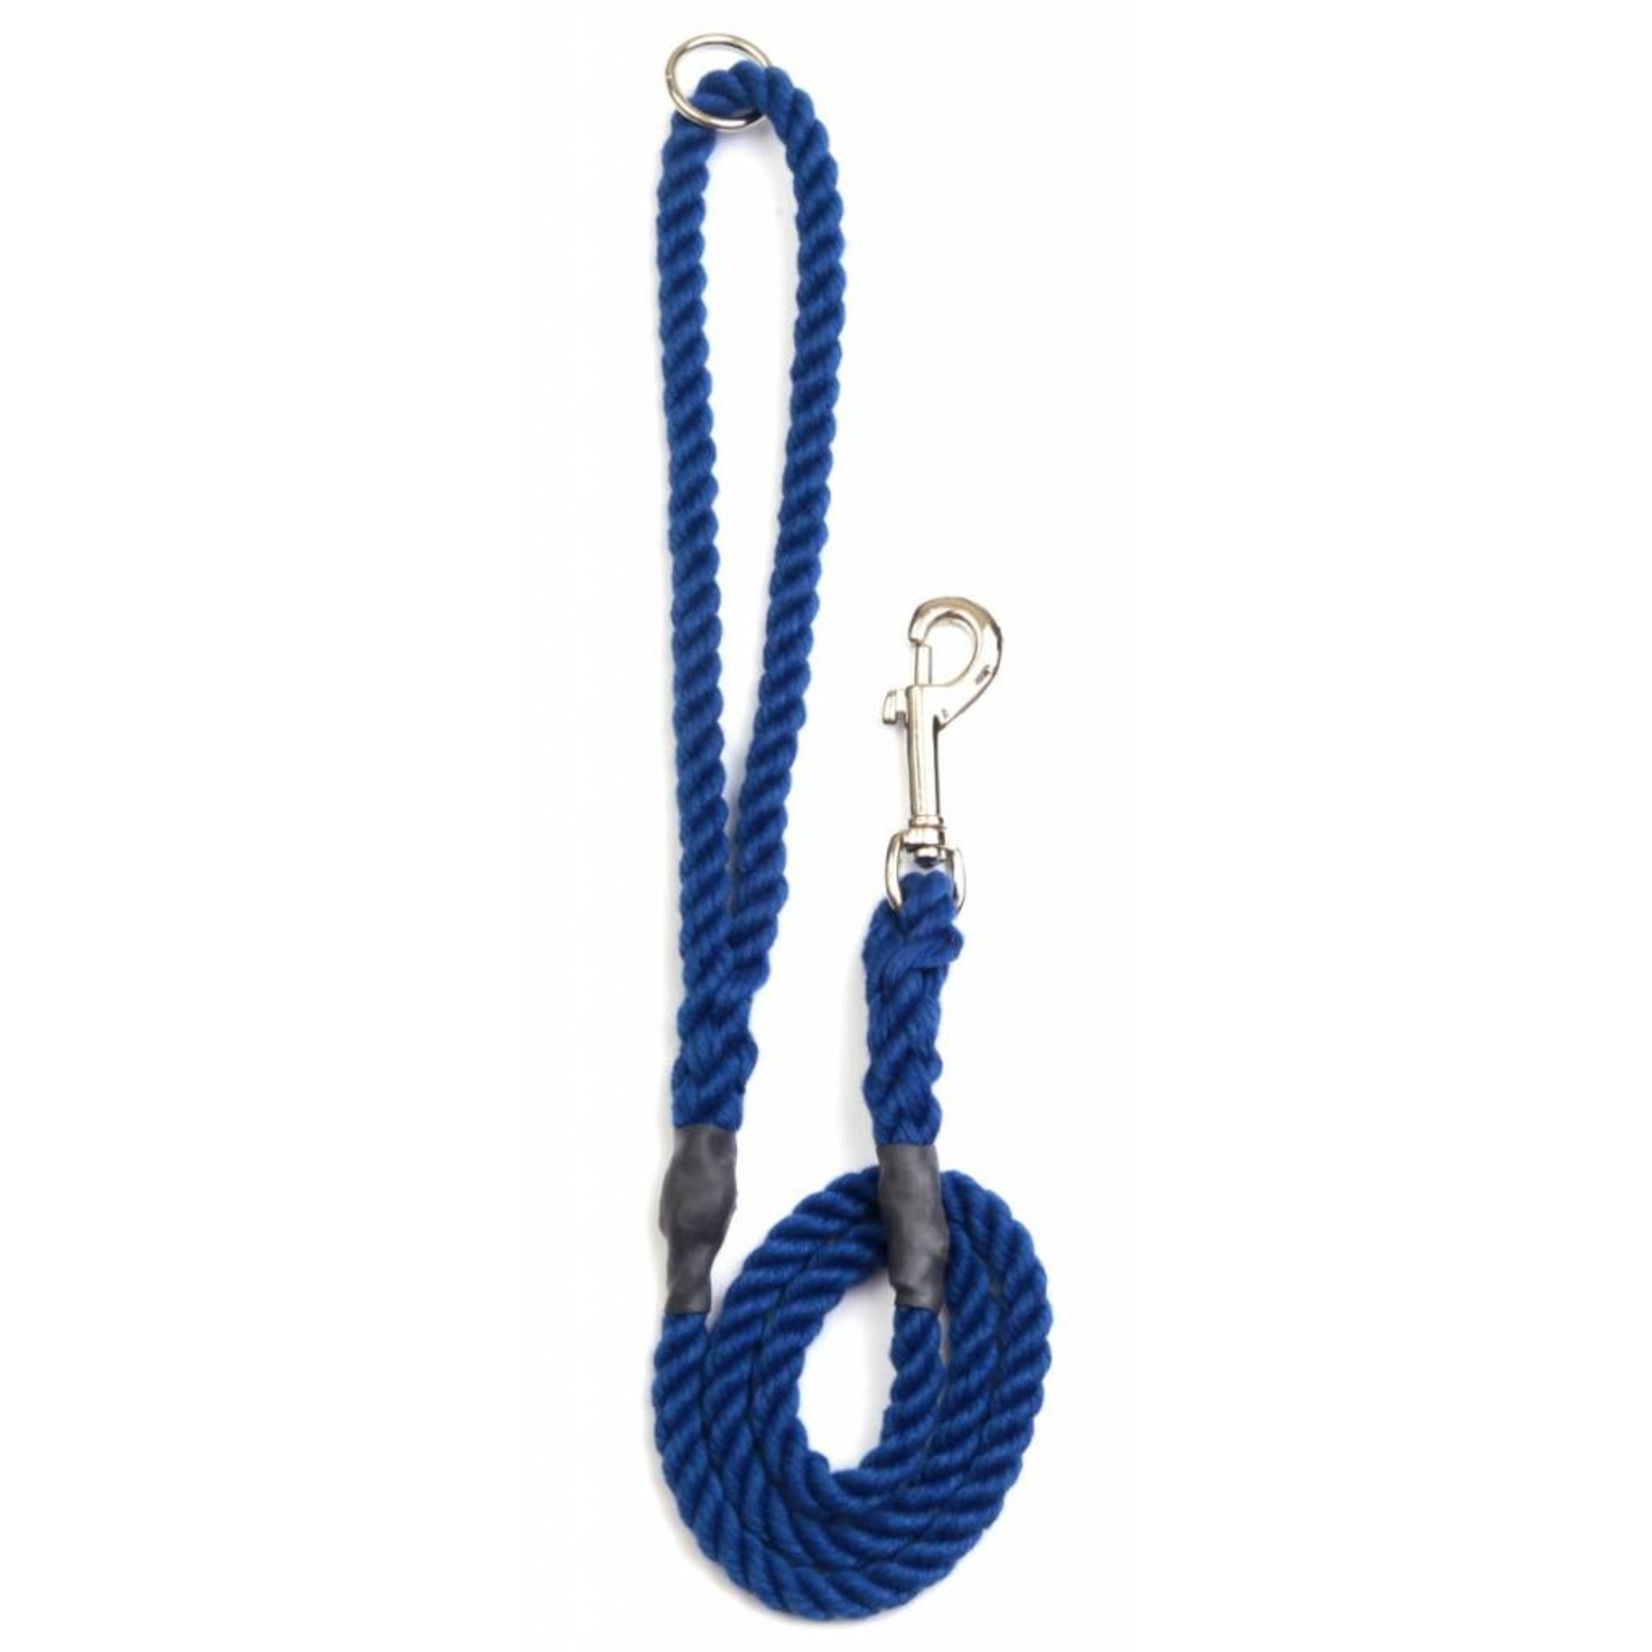 Animate 12mm x 48inch Gun Dog Rope Lead with Trigger Hook